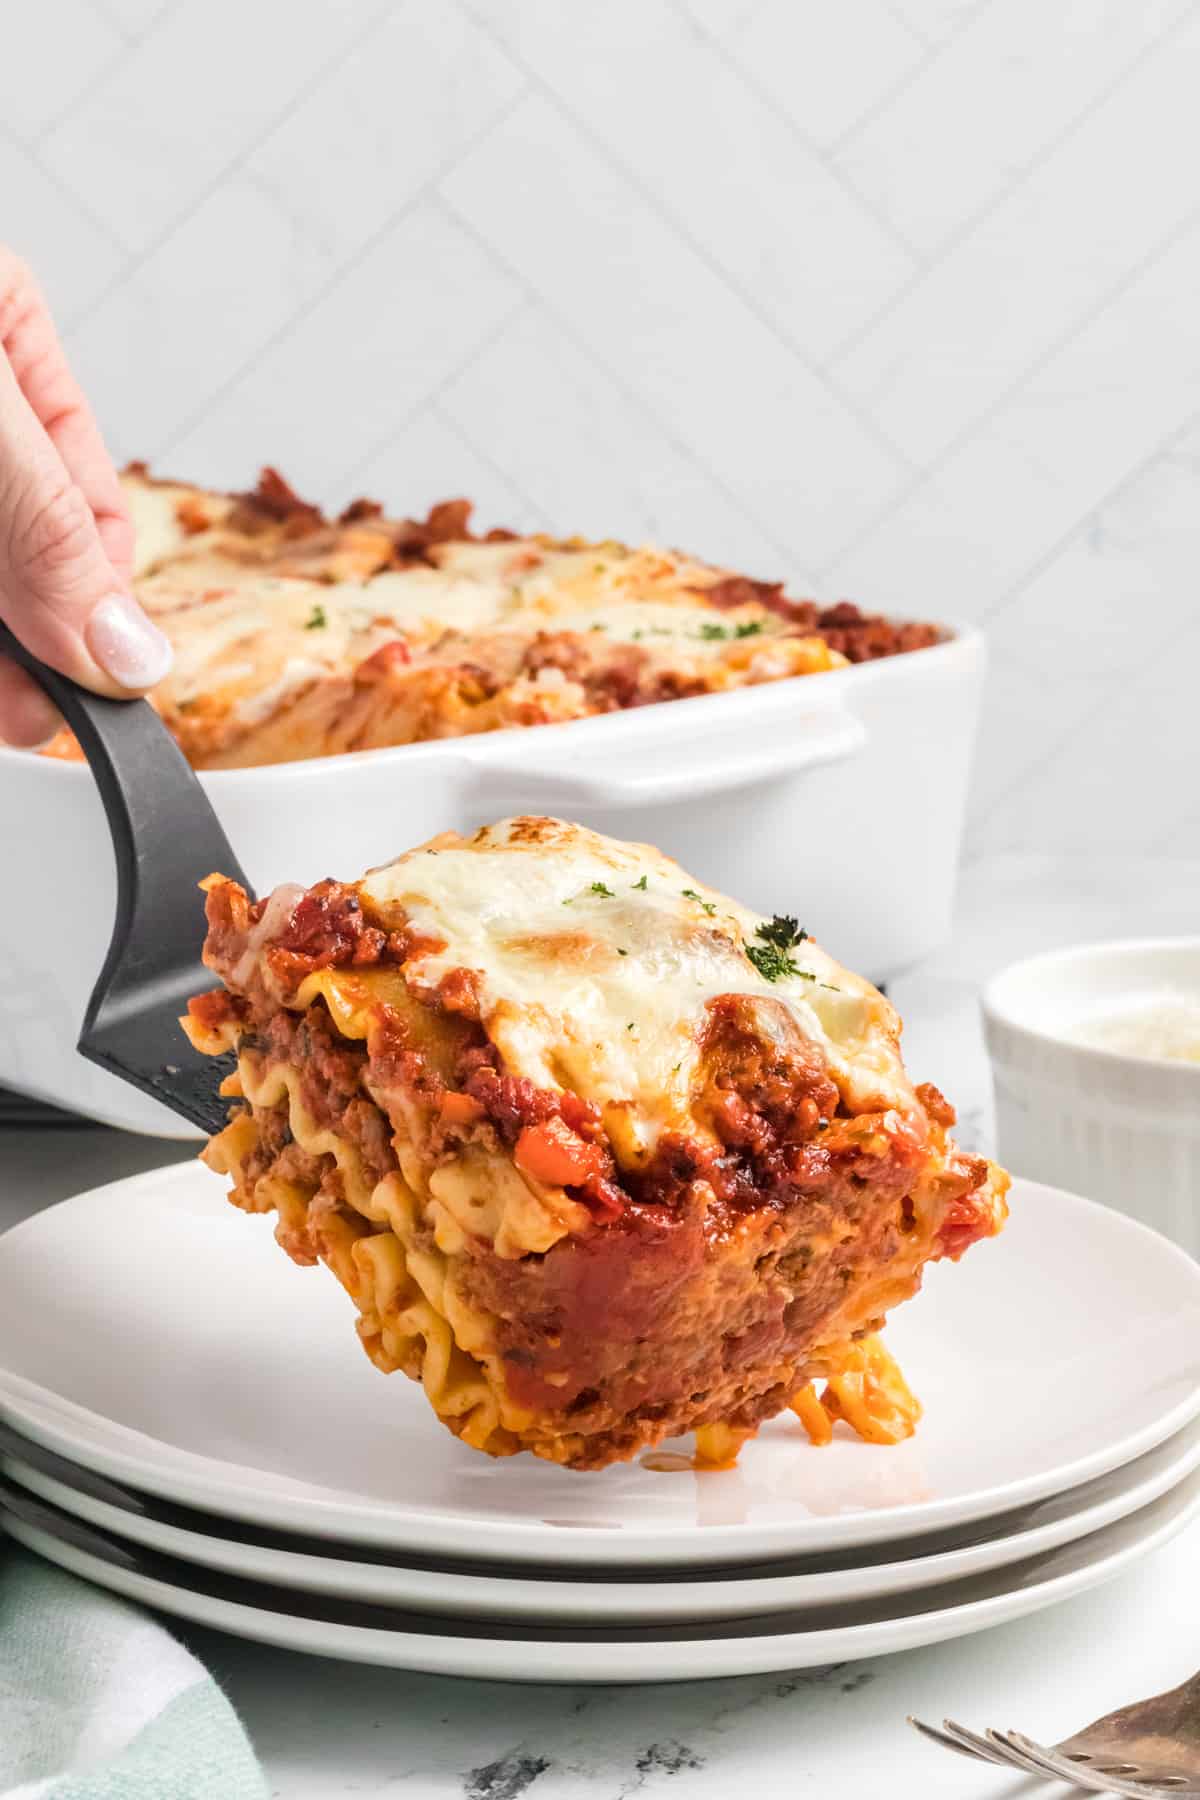 A slice of lasagna is being placed on a white plate.